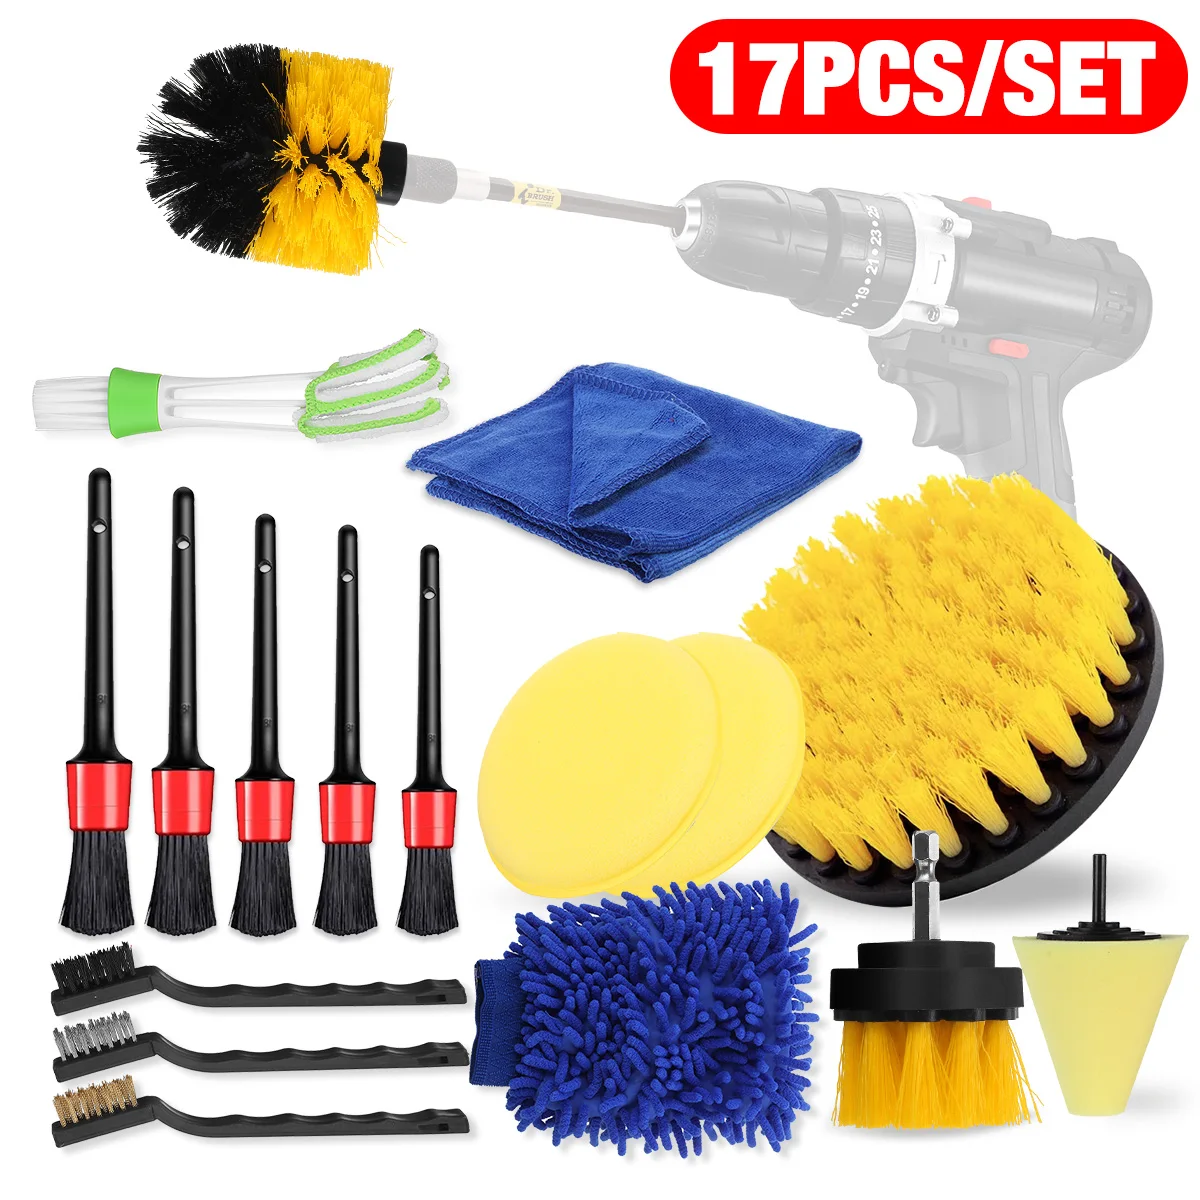 

17 Pcs Car Cleaning Detailing Kit with Boar Bristle Car Detail Brushes Electric Drill Brush Car Wax Applicator Pad Wash Towel